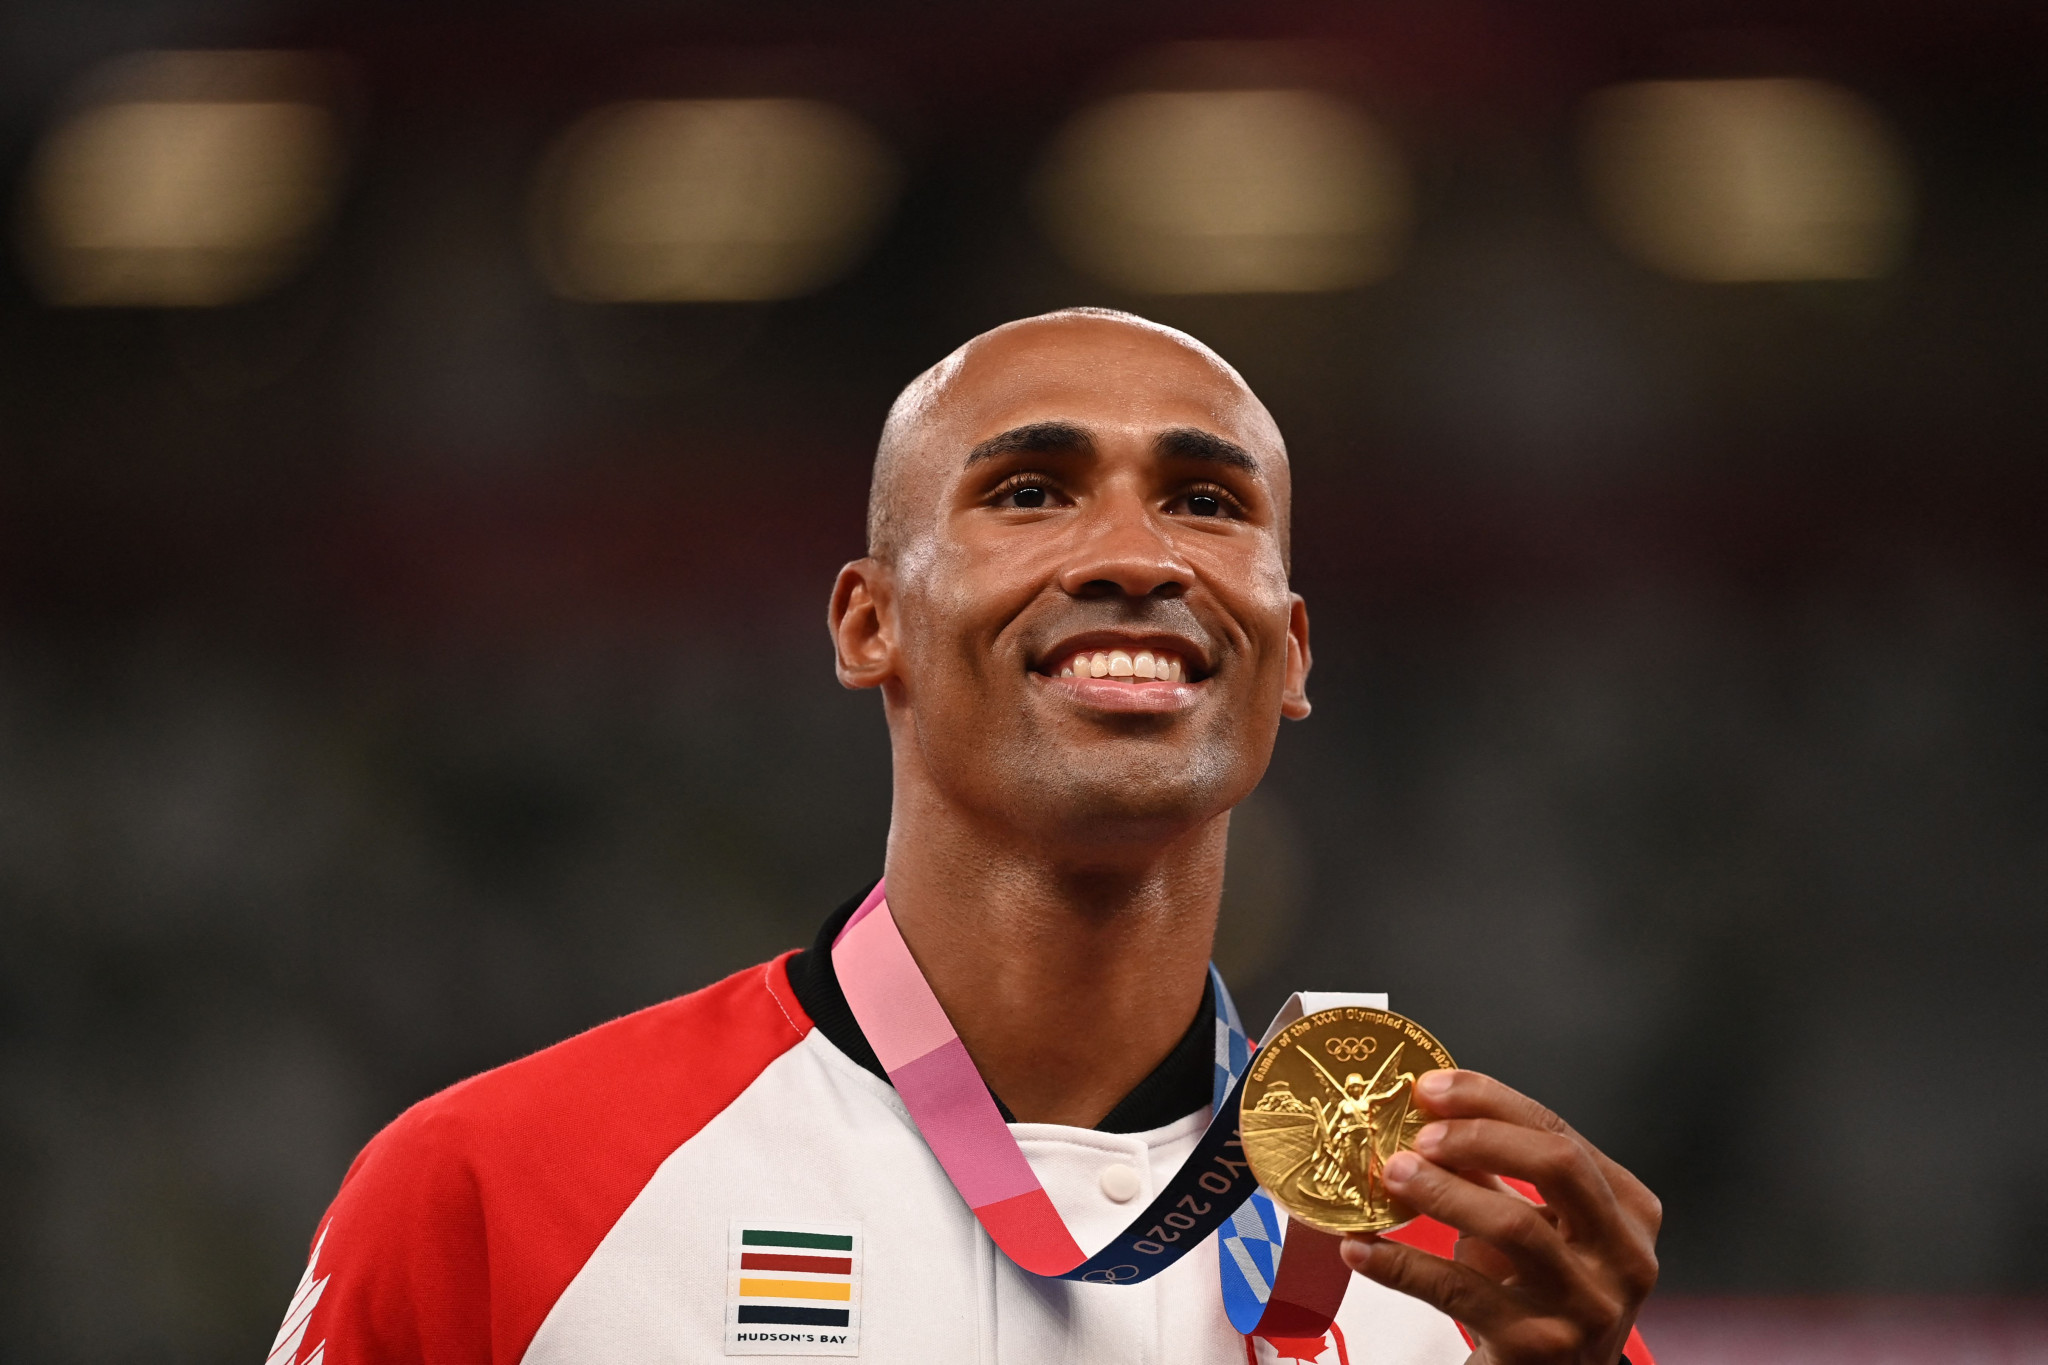 Damian Warner has been named Canada's Athlete of the Year following his Olympic decathlon victory ©Getty Images